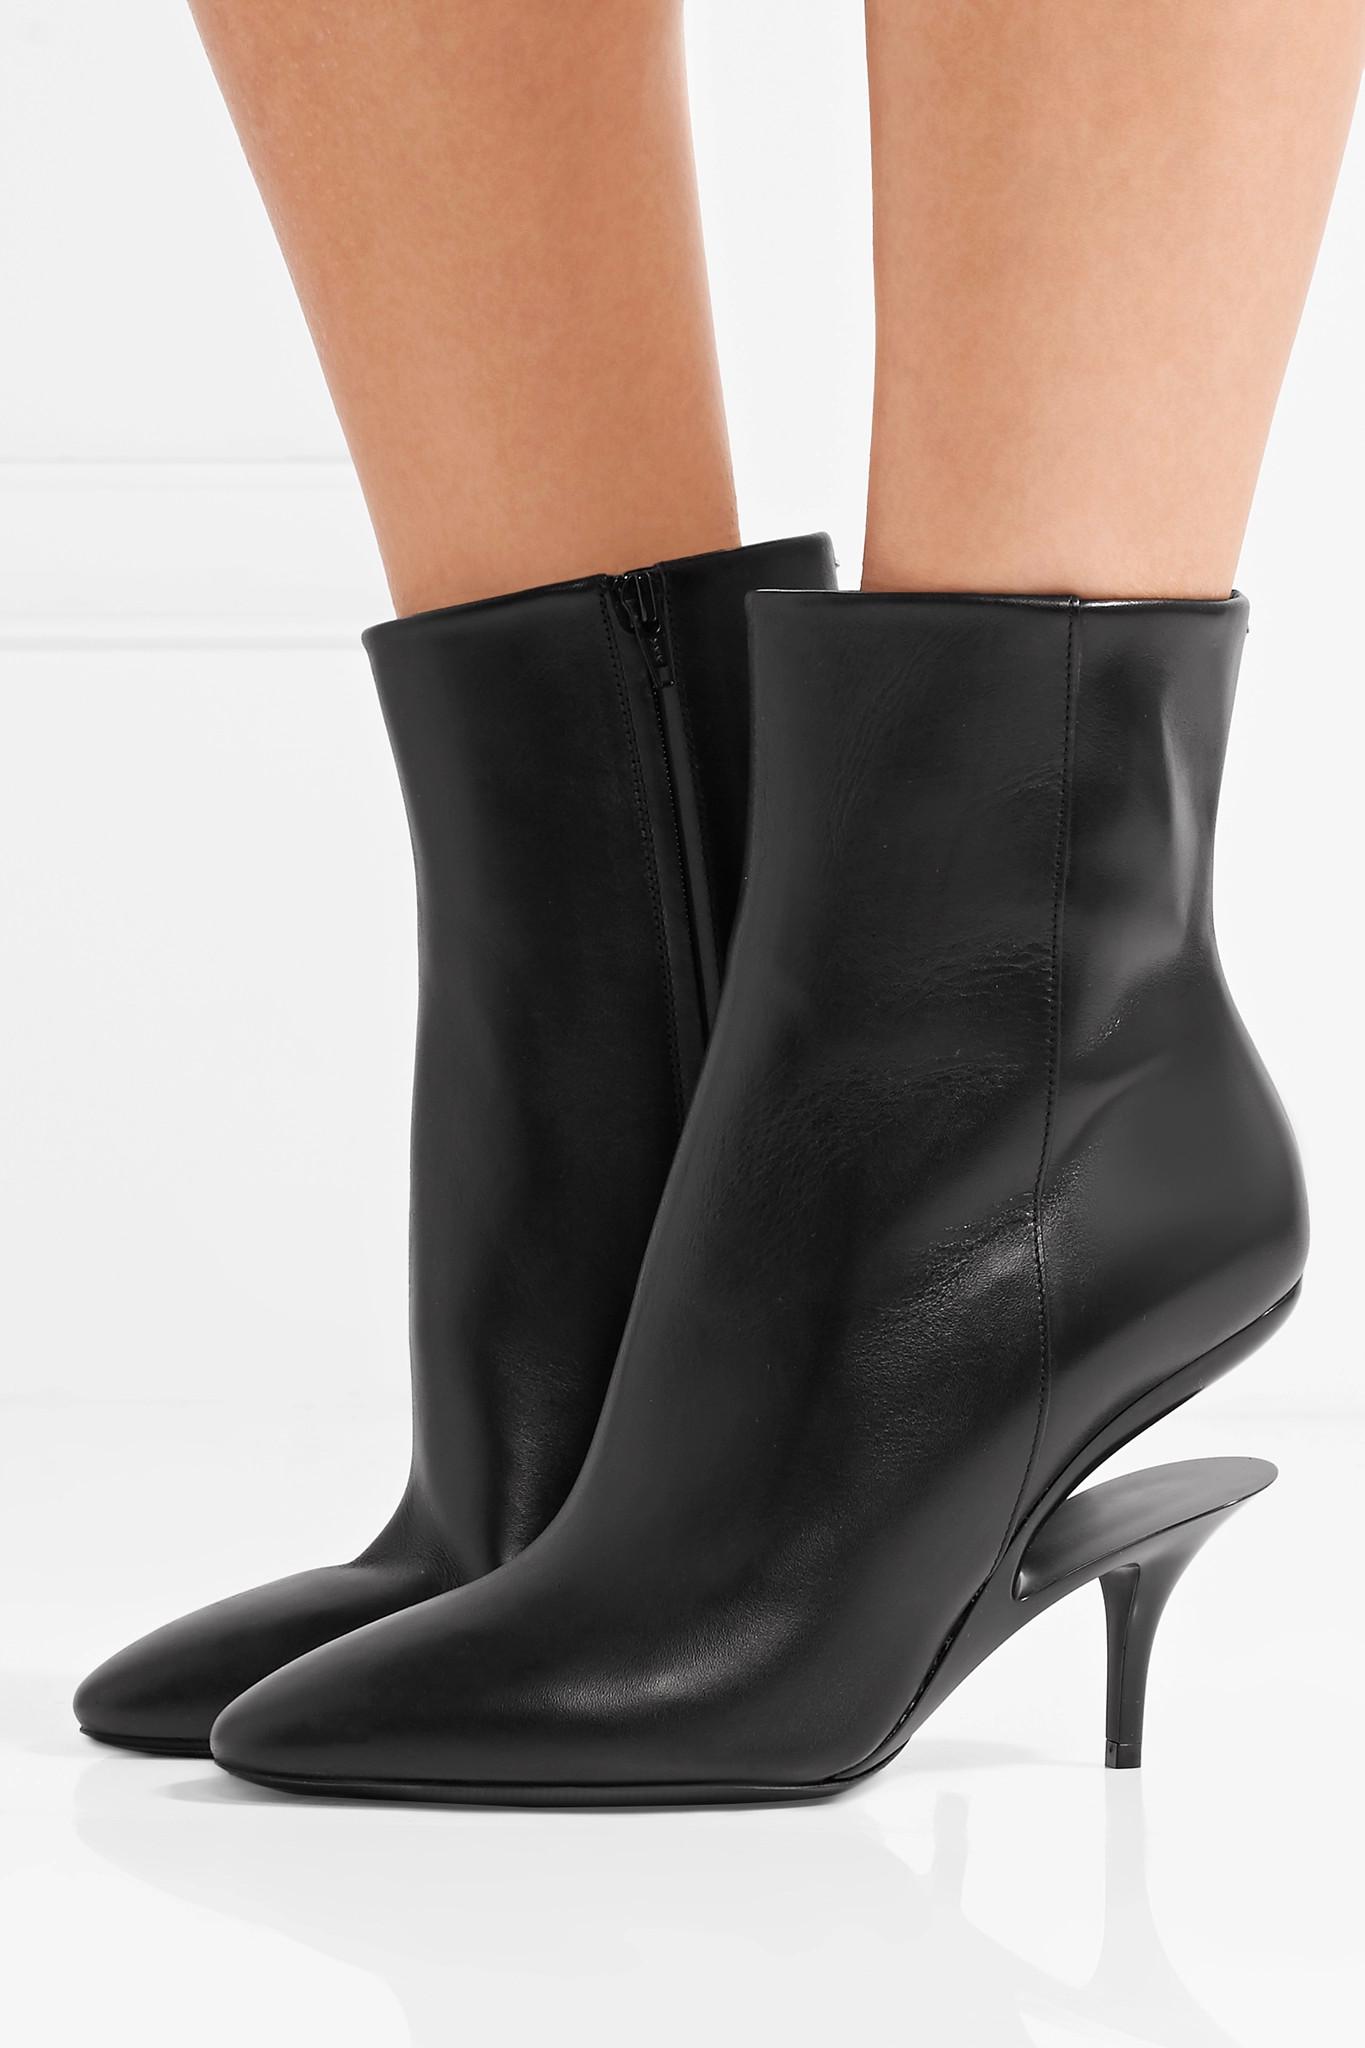 Lyst - Maison Margiela Cutout Leather Ankle Boots in Black